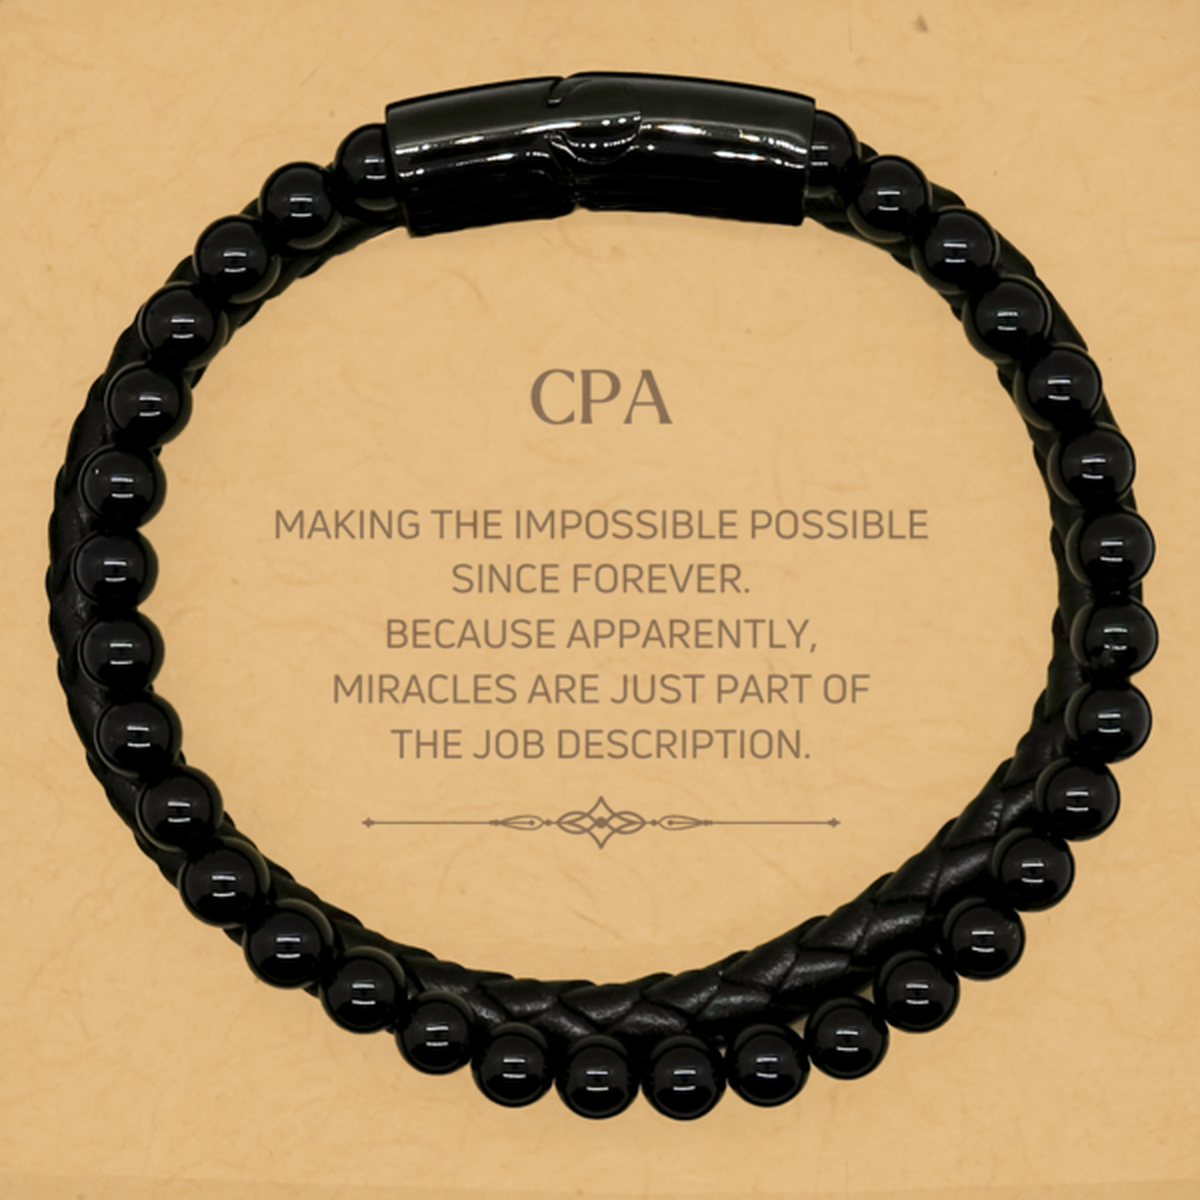 Funny CPA Gifts, Miracles are just part of the job description, Inspirational Birthday Stone Leather Bracelets For CPA, Men, Women, Coworkers, Friends, Boss